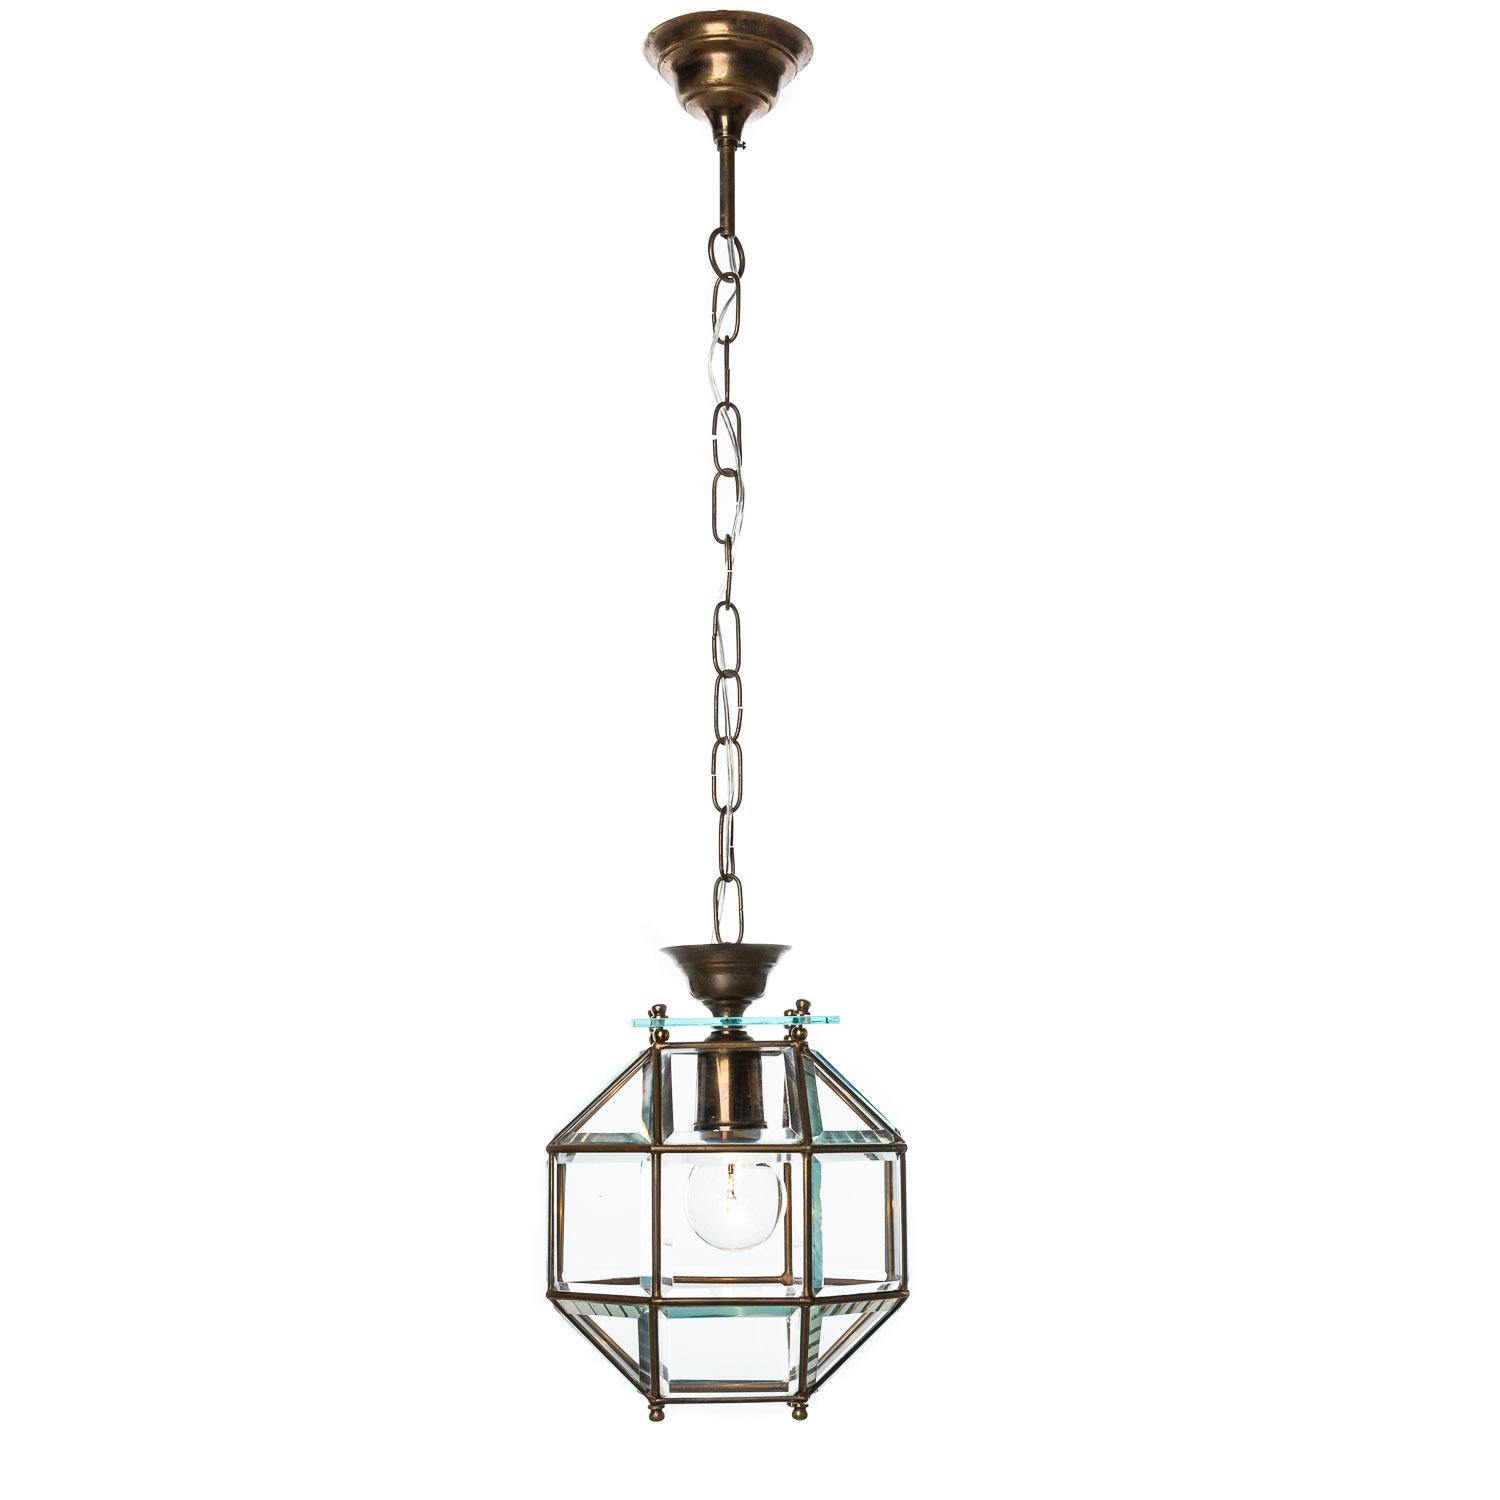 Stylish lantern consist of a brass frame with many fragments made of cut shiny crystal glass, hanging from a thick square glass plate. A wanna have! Manufactured circa 1950s. 
We have a pair and a single piece slightly different (code 143b).